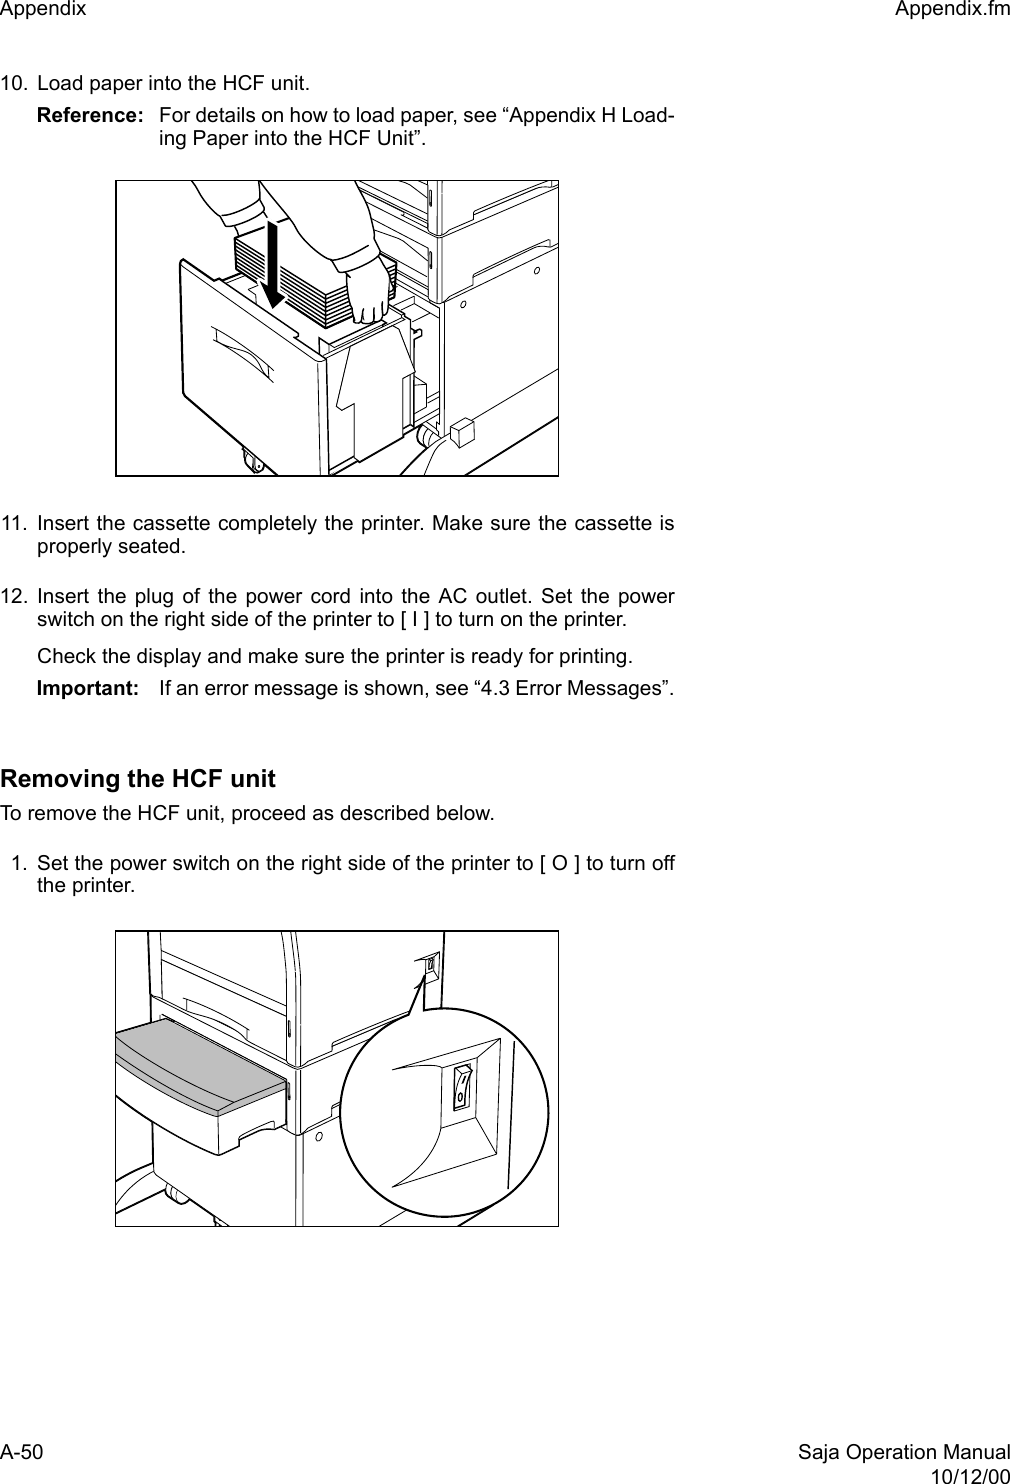 A-50 Saja Operation Manual10/12/00Appendix  Appendix.fm10. Load paper into the HCF unit. Reference:  For details on how to load paper, see “Appendix H Load-ing Paper into the HCF Unit”. 11. Insert the cassette completely the printer. Make sure the cassette isproperly seated.12. Insert the plug of the power cord into the AC outlet. Set the powerswitch on the right side of the printer to [ I ] to turn on the printer.Check the display and make sure the printer is ready for printing.Important: If an error message is shown, see “4.3 Error Messages”.Removing the HCF unitTo remove the HCF unit, proceed as described below. 1. Set the power switch on the right side of the printer to [ O ] to turn offthe printer.